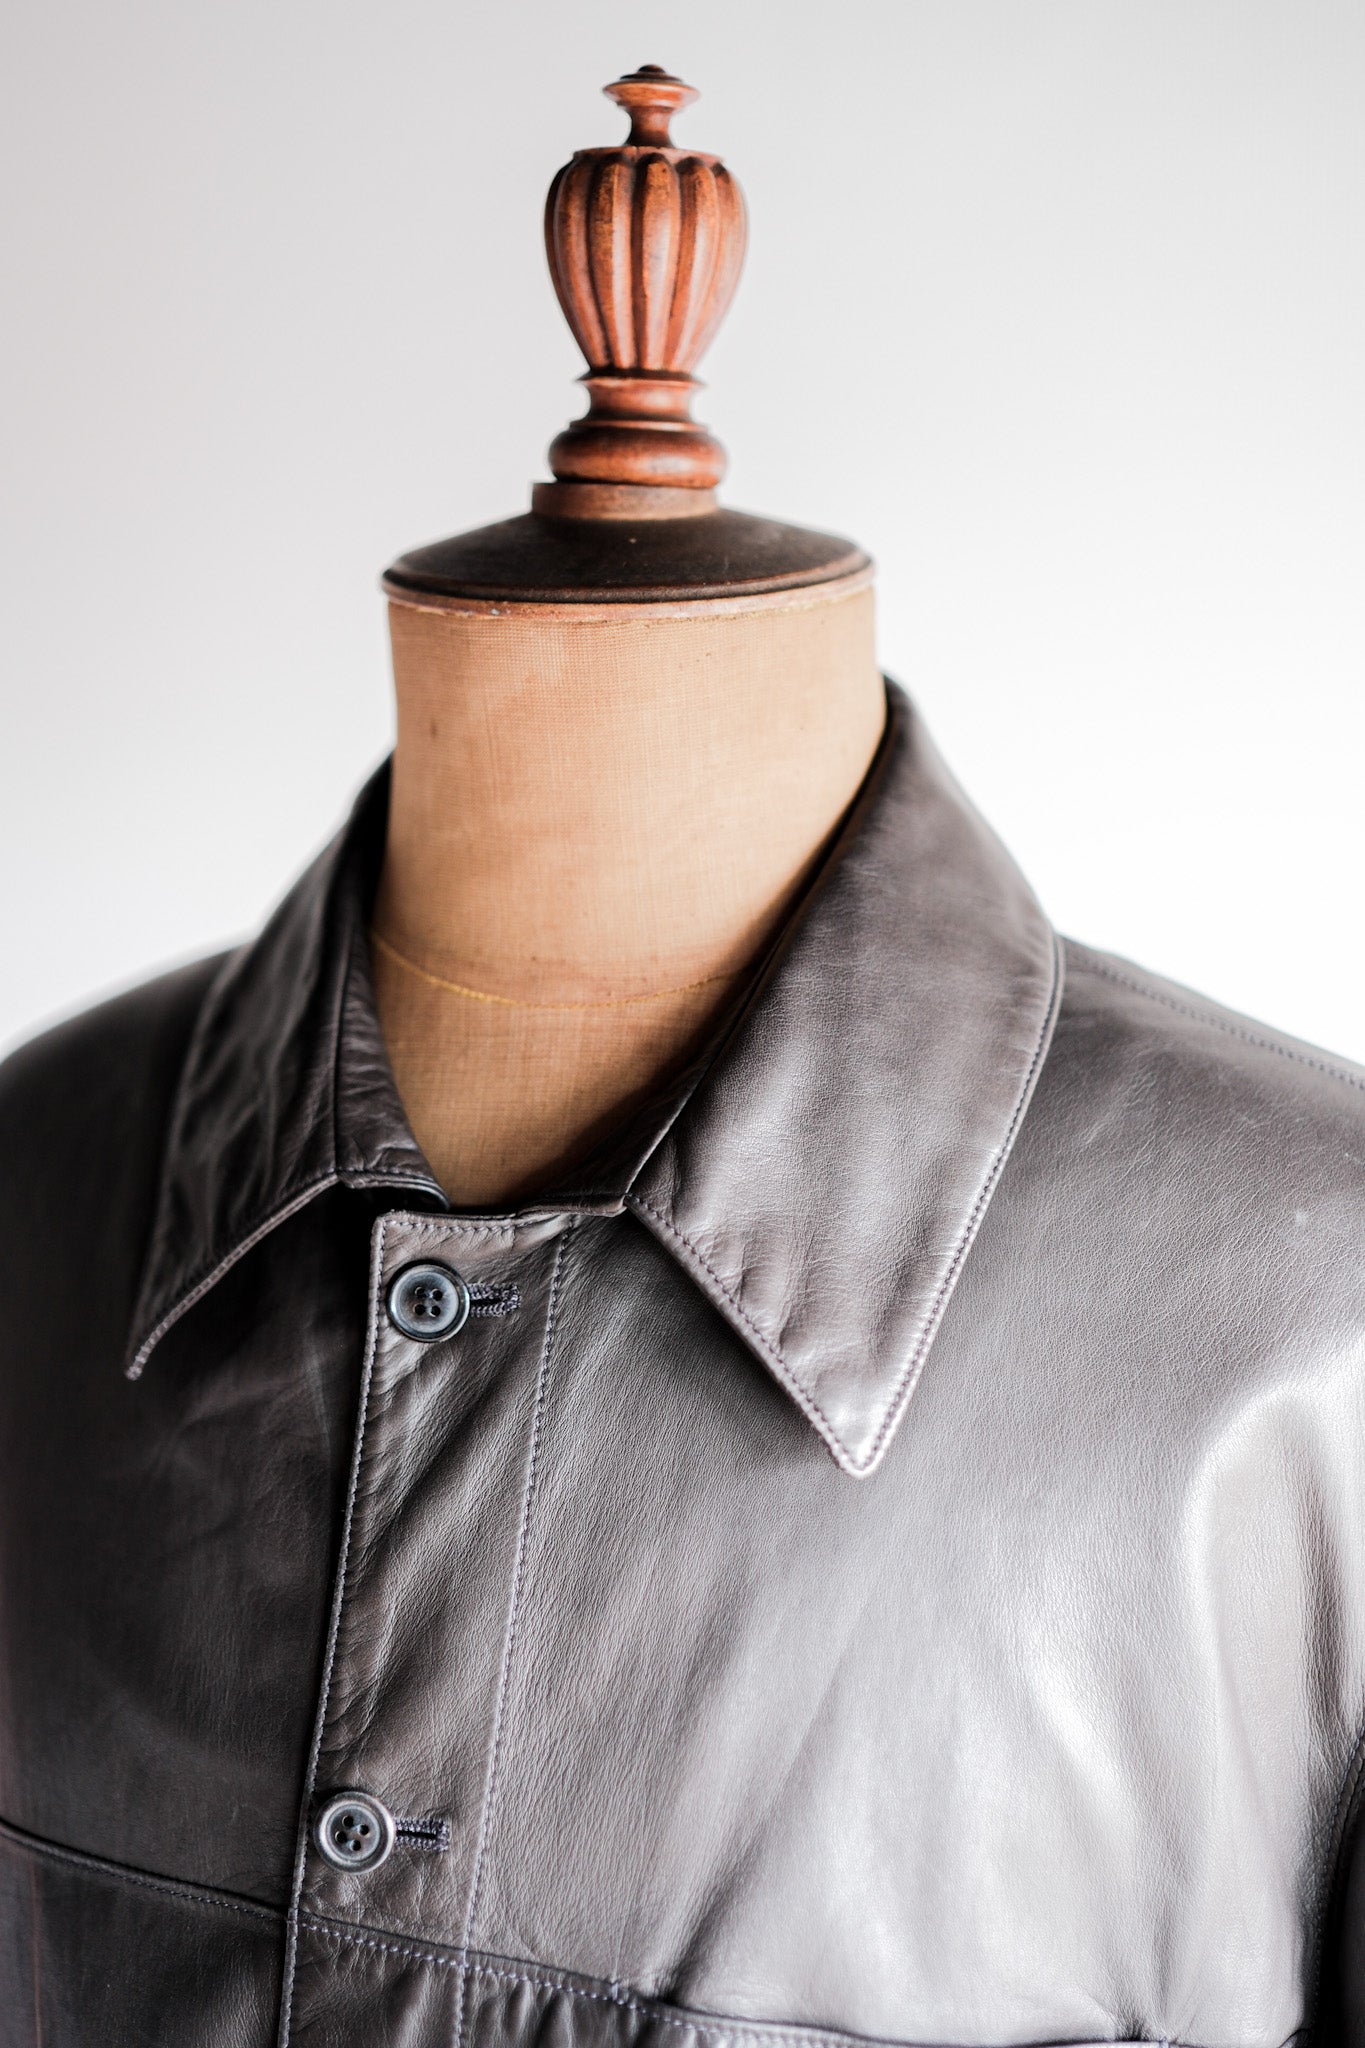 90's] Old SERAPHIN Lamb Leather Shirt Jacket Size.54